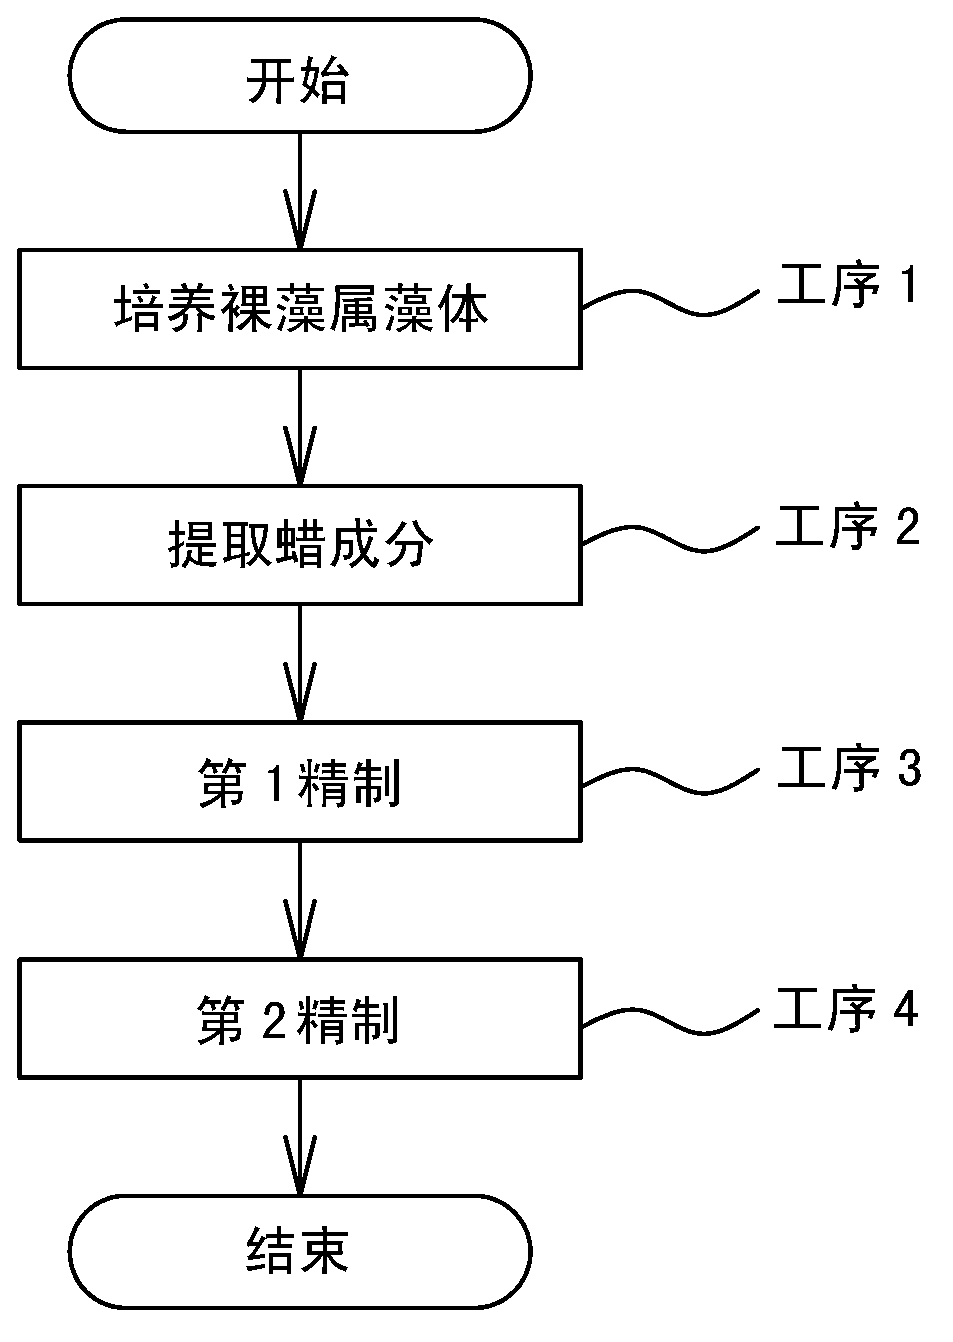 Process for production of euglena containing wax ester at high content, and process for production of wax ester